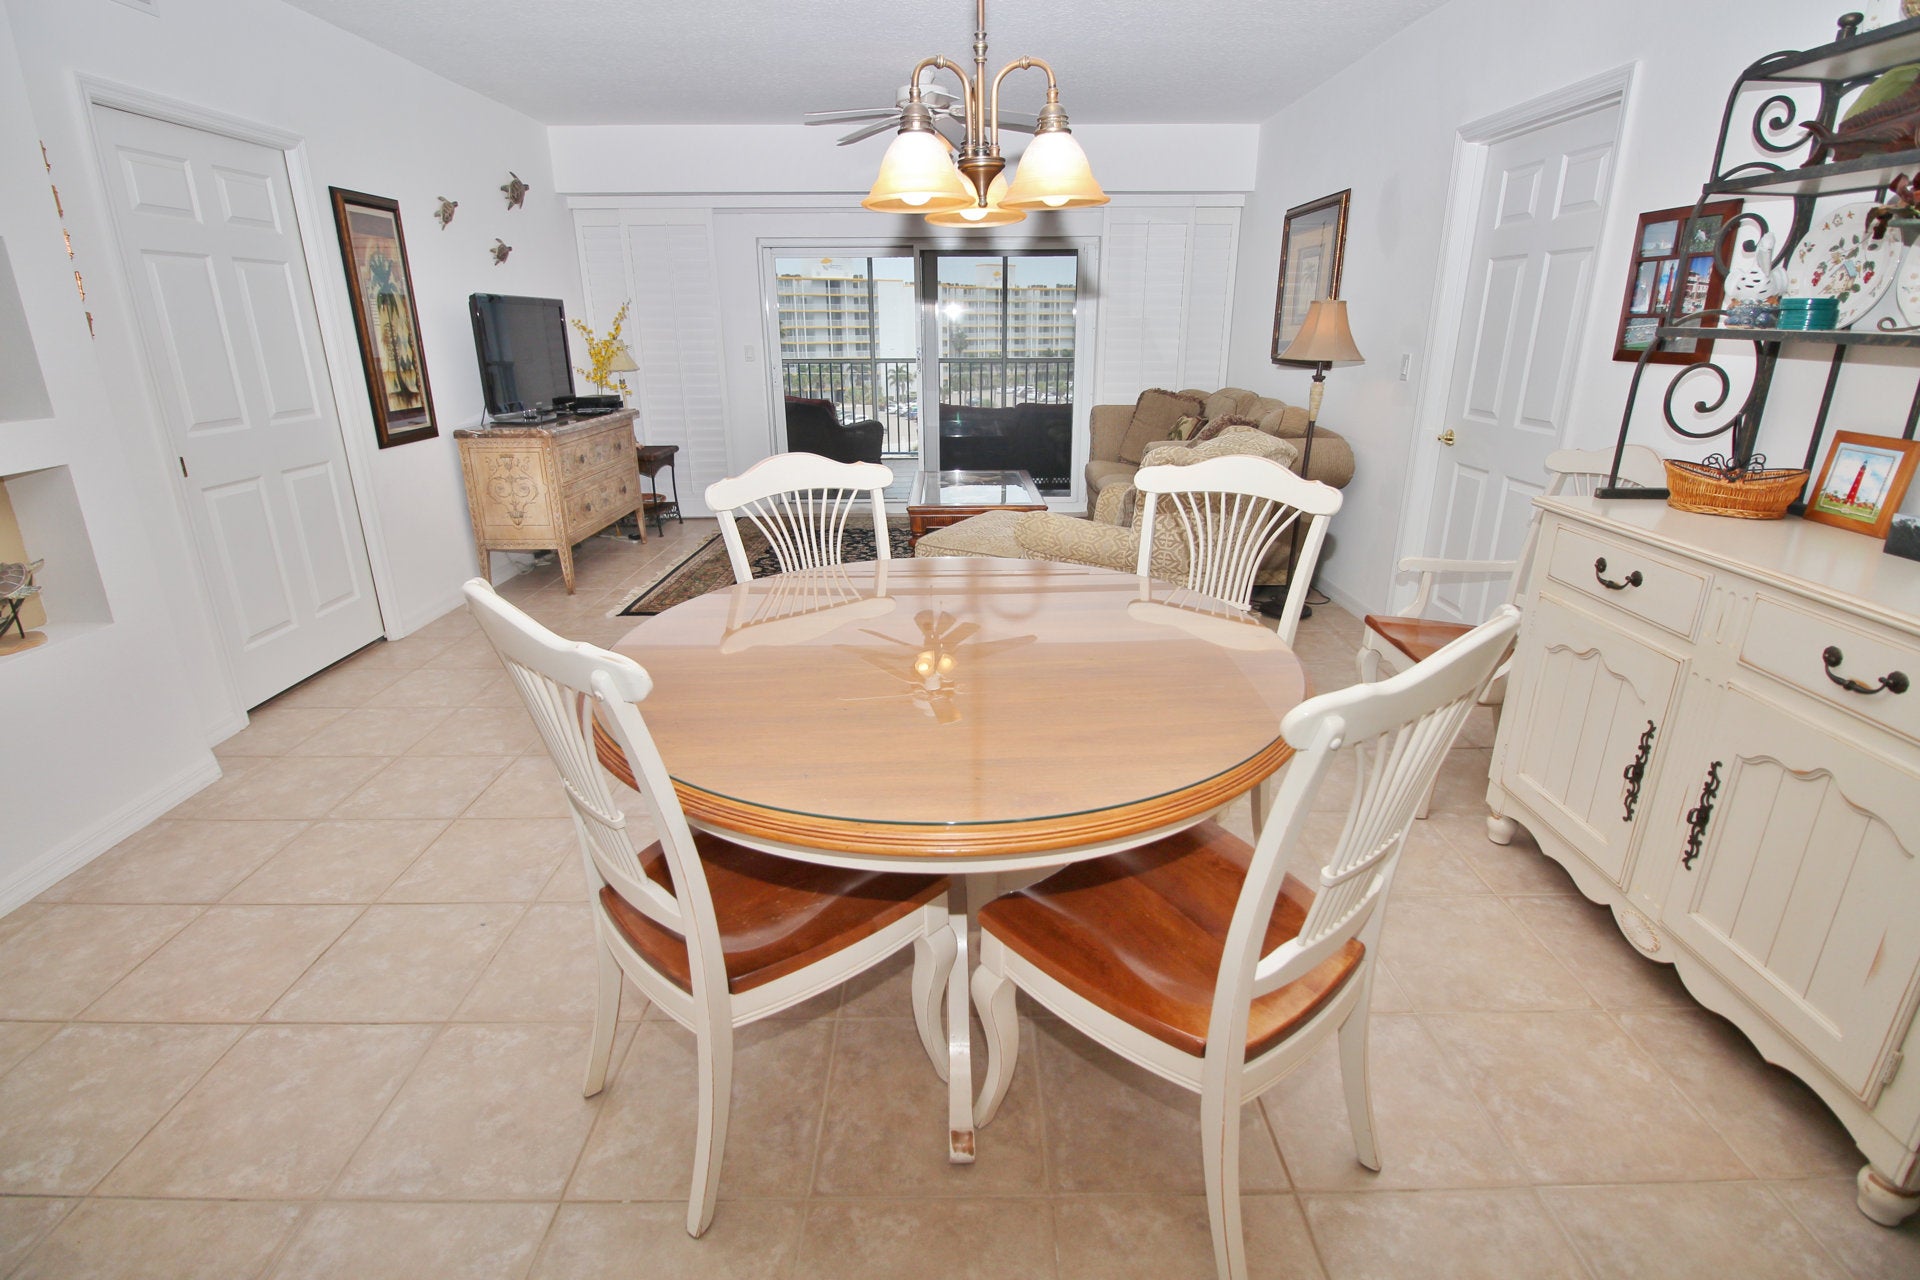 Dining area with round table